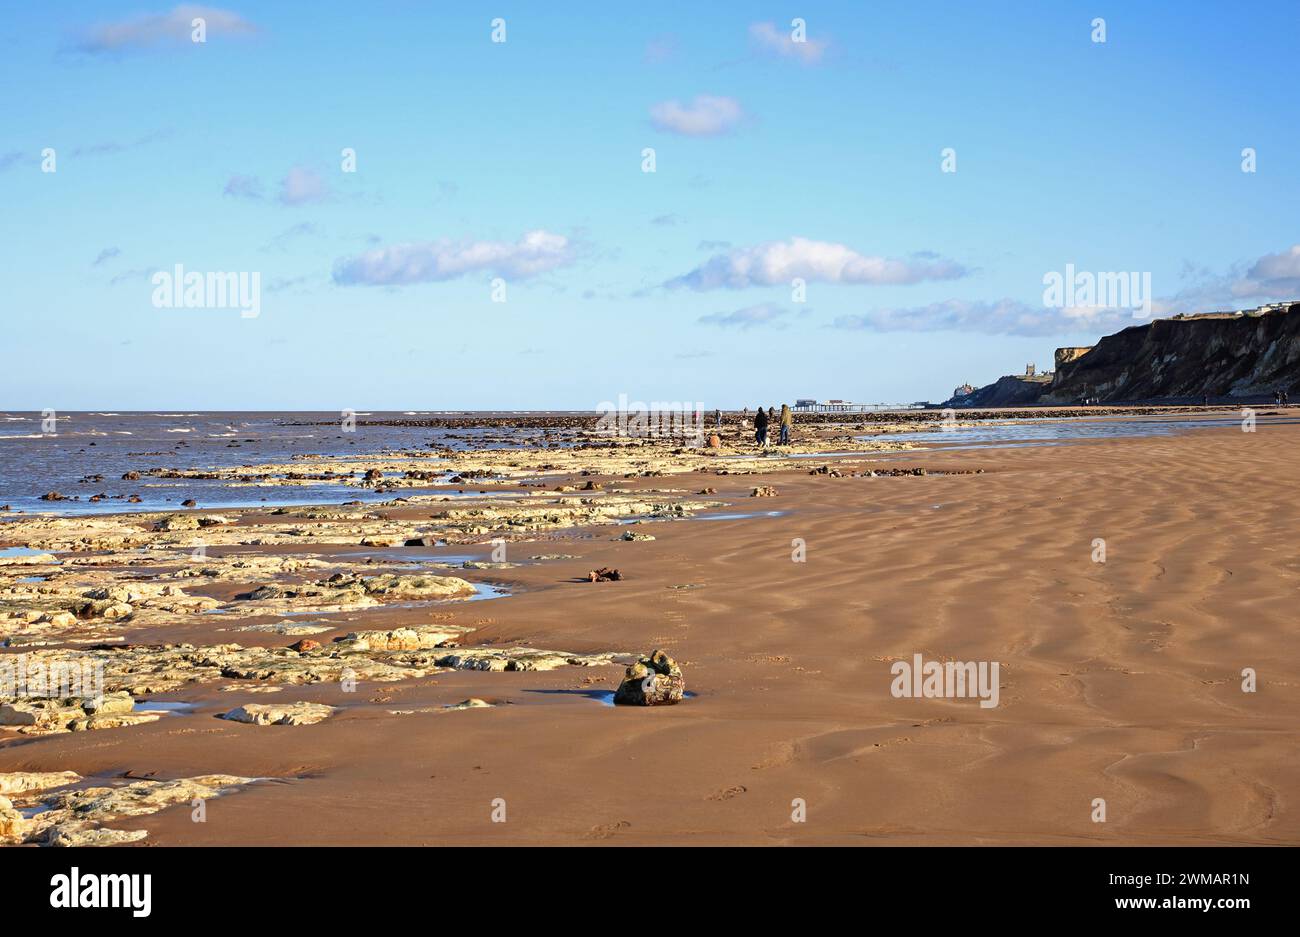 A view of the beach at low water during a spring tide with people walking the shoreline at West Runton, Norfolk, England, United Kingdom. Stock Photo